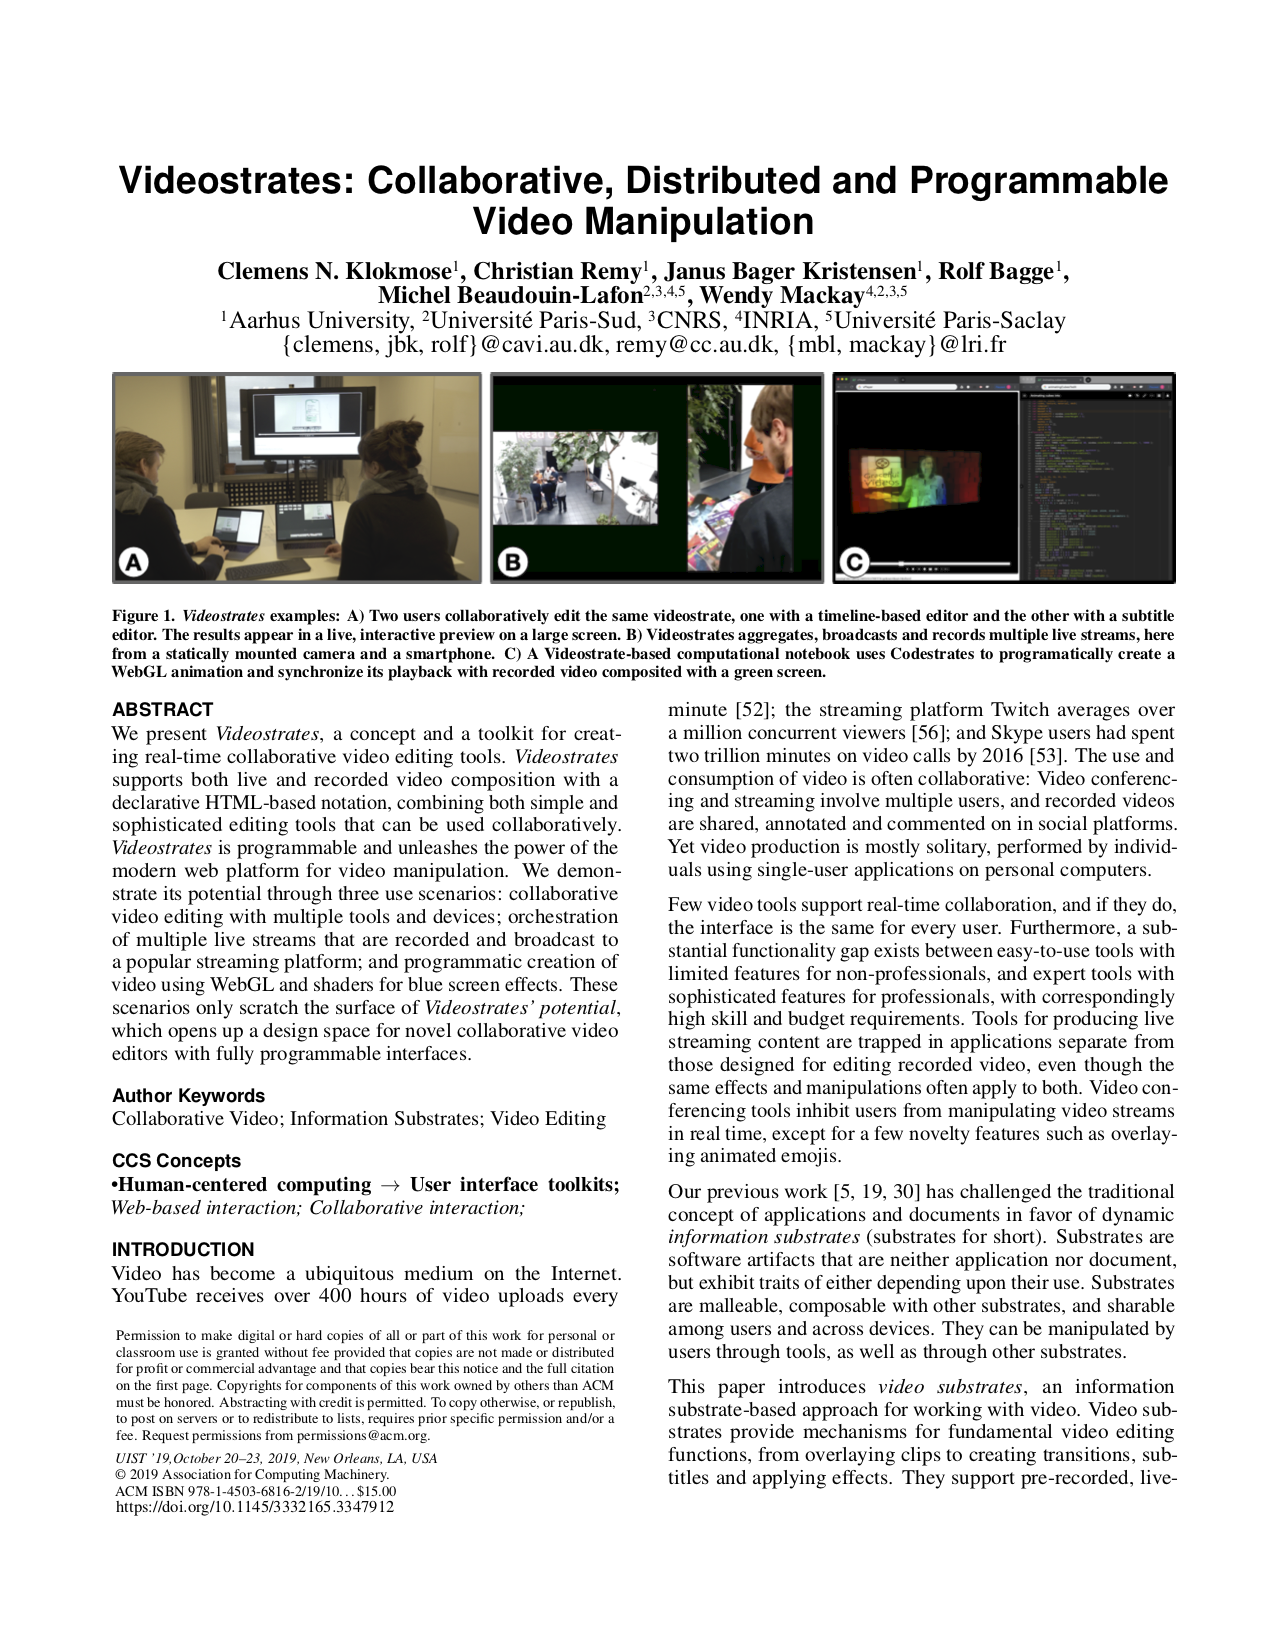 Frontpage of Videostrates paper